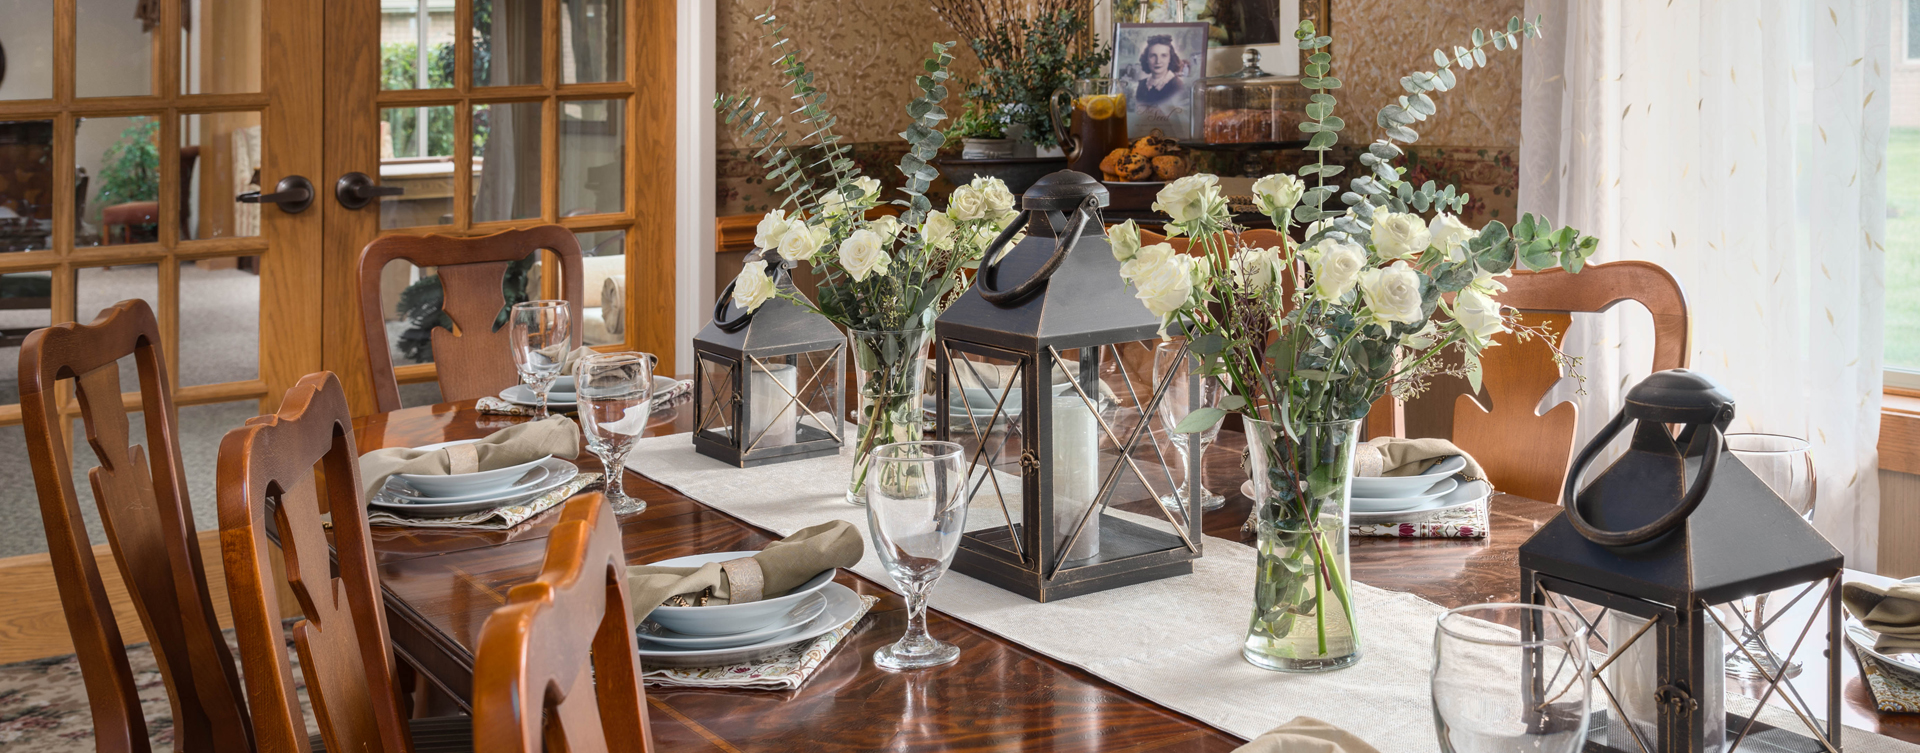 Celebrate special occasions in the private dining room at Bickford of Middletown